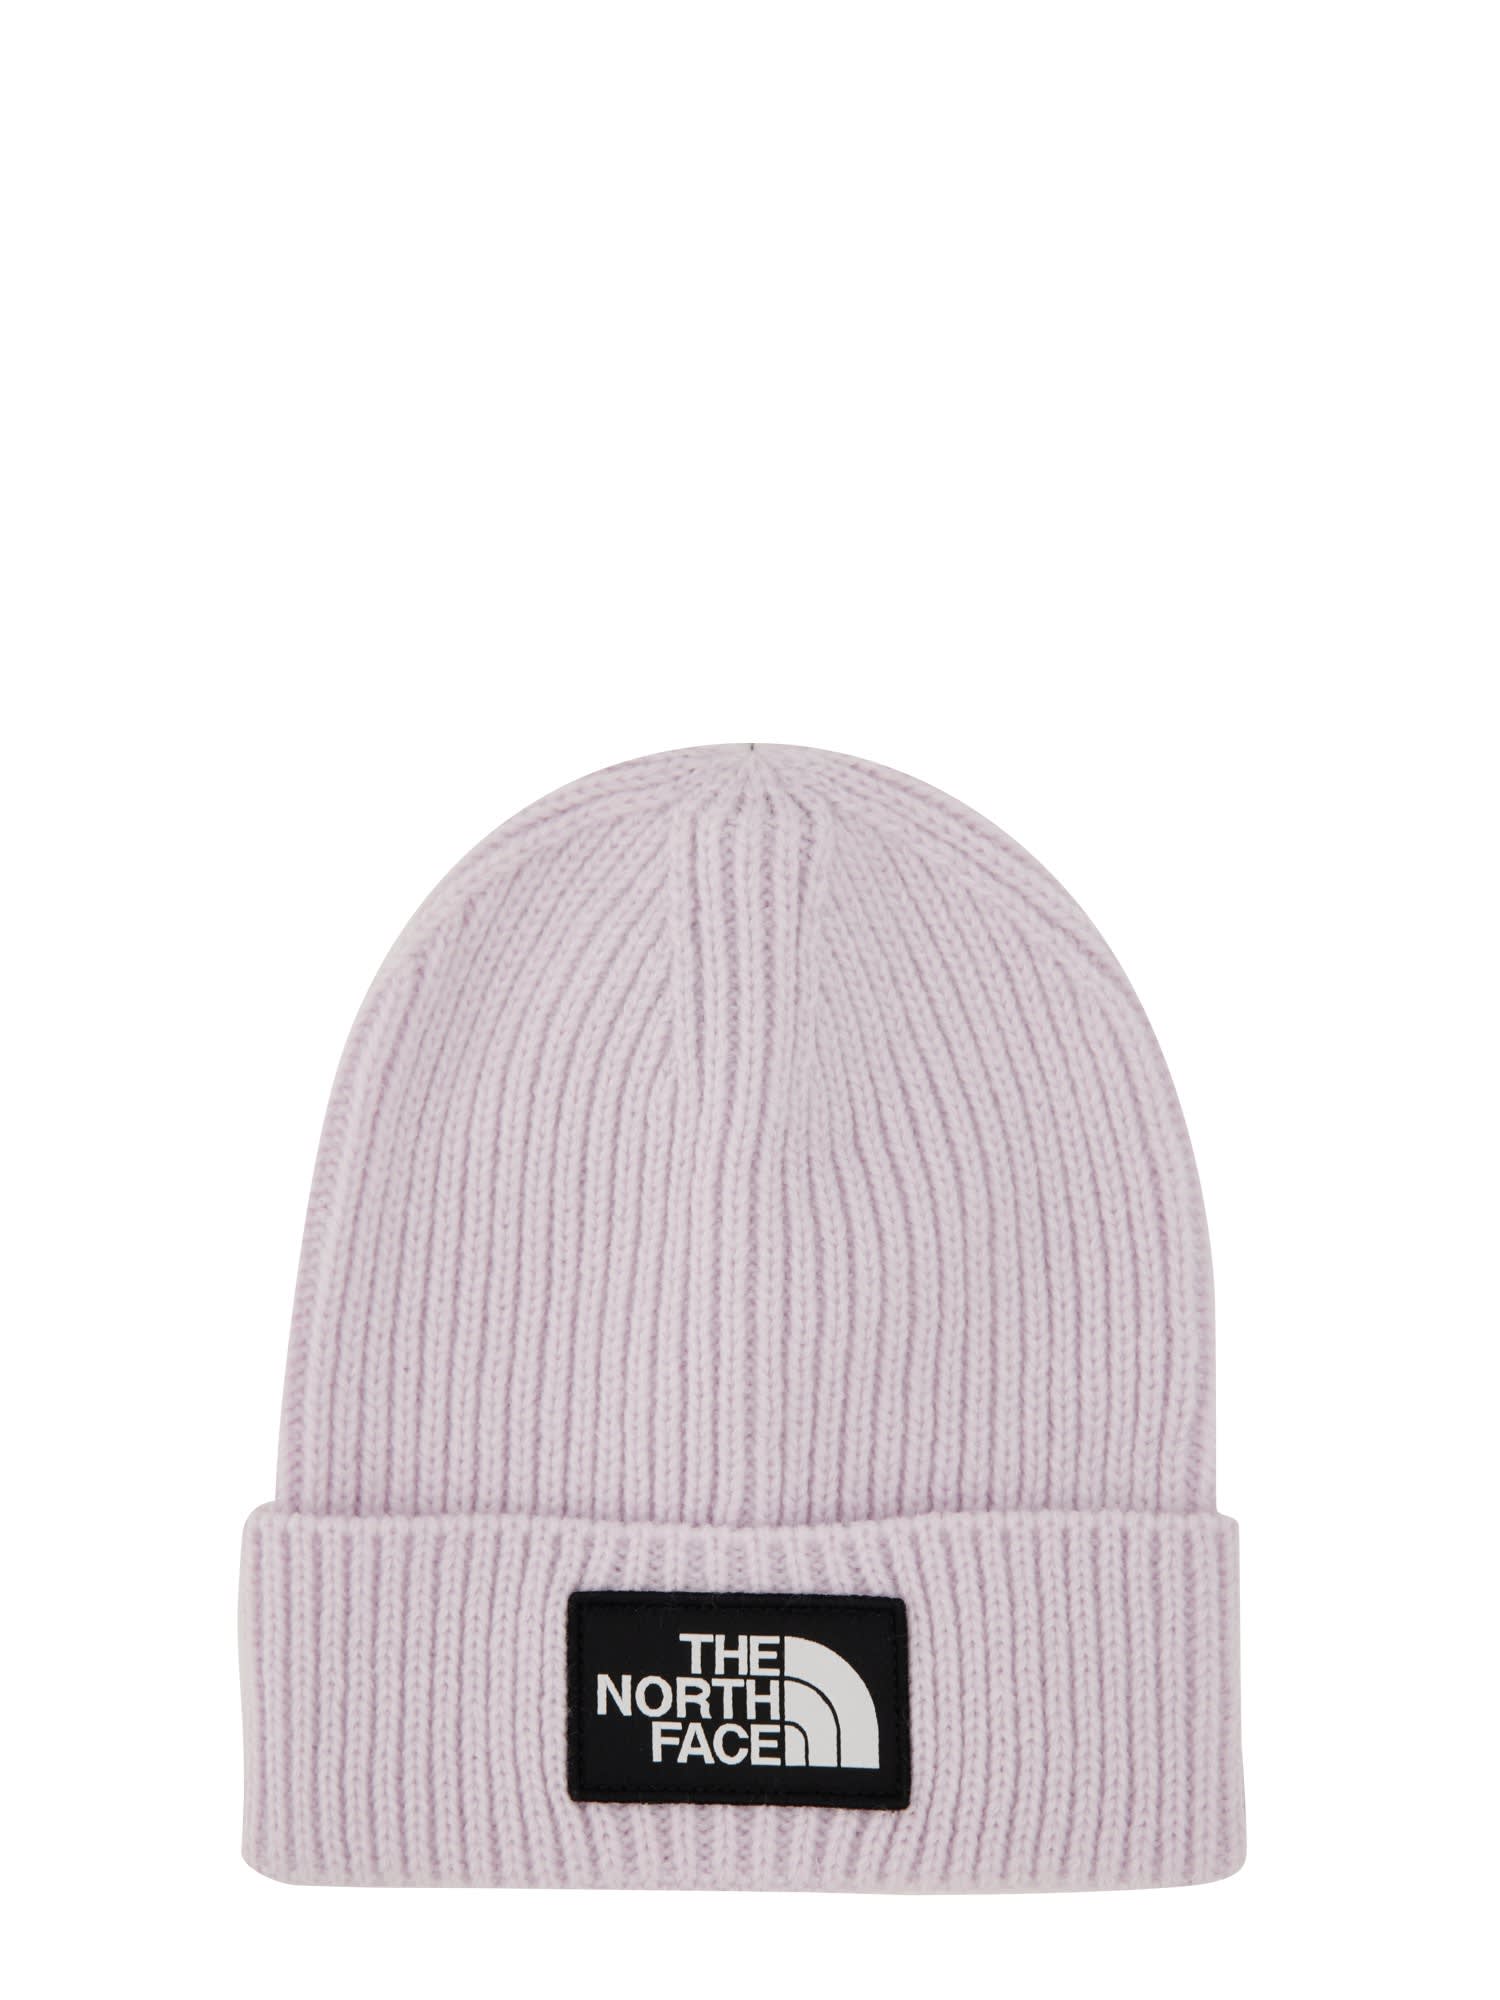 The North Face Beanie Hat